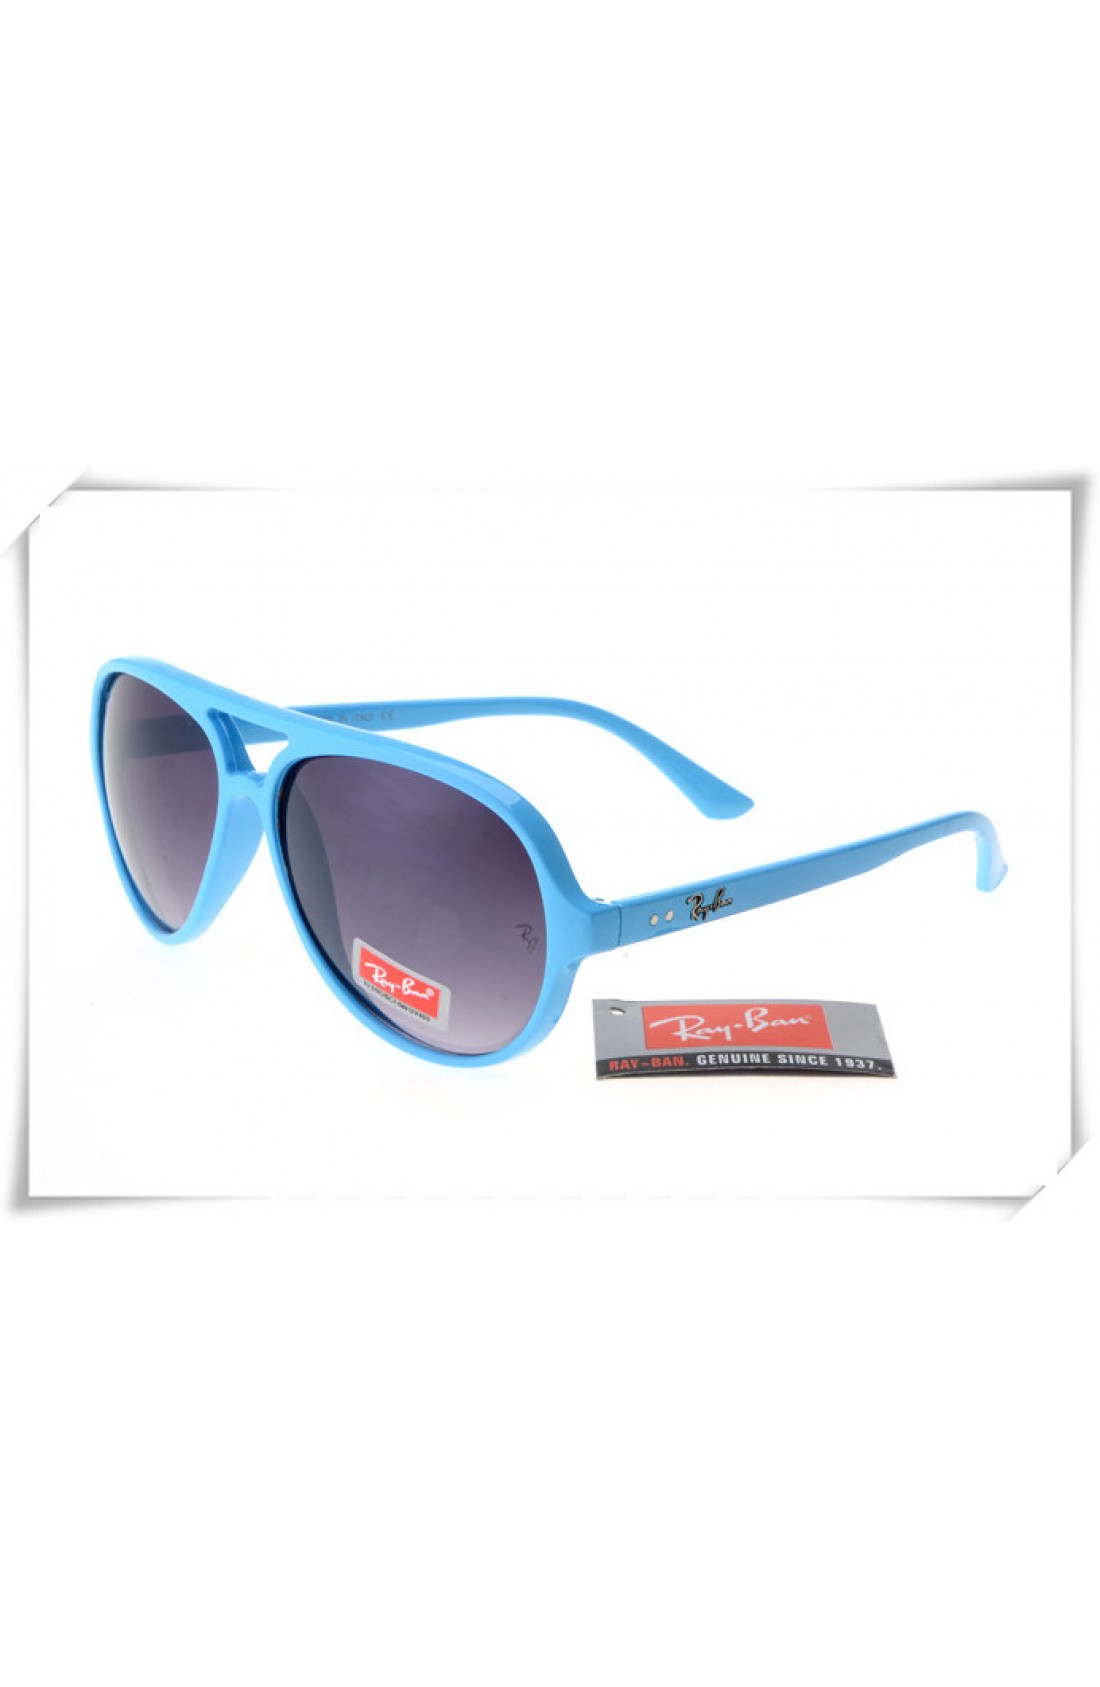 ray ban rb4125 cats sunglasses